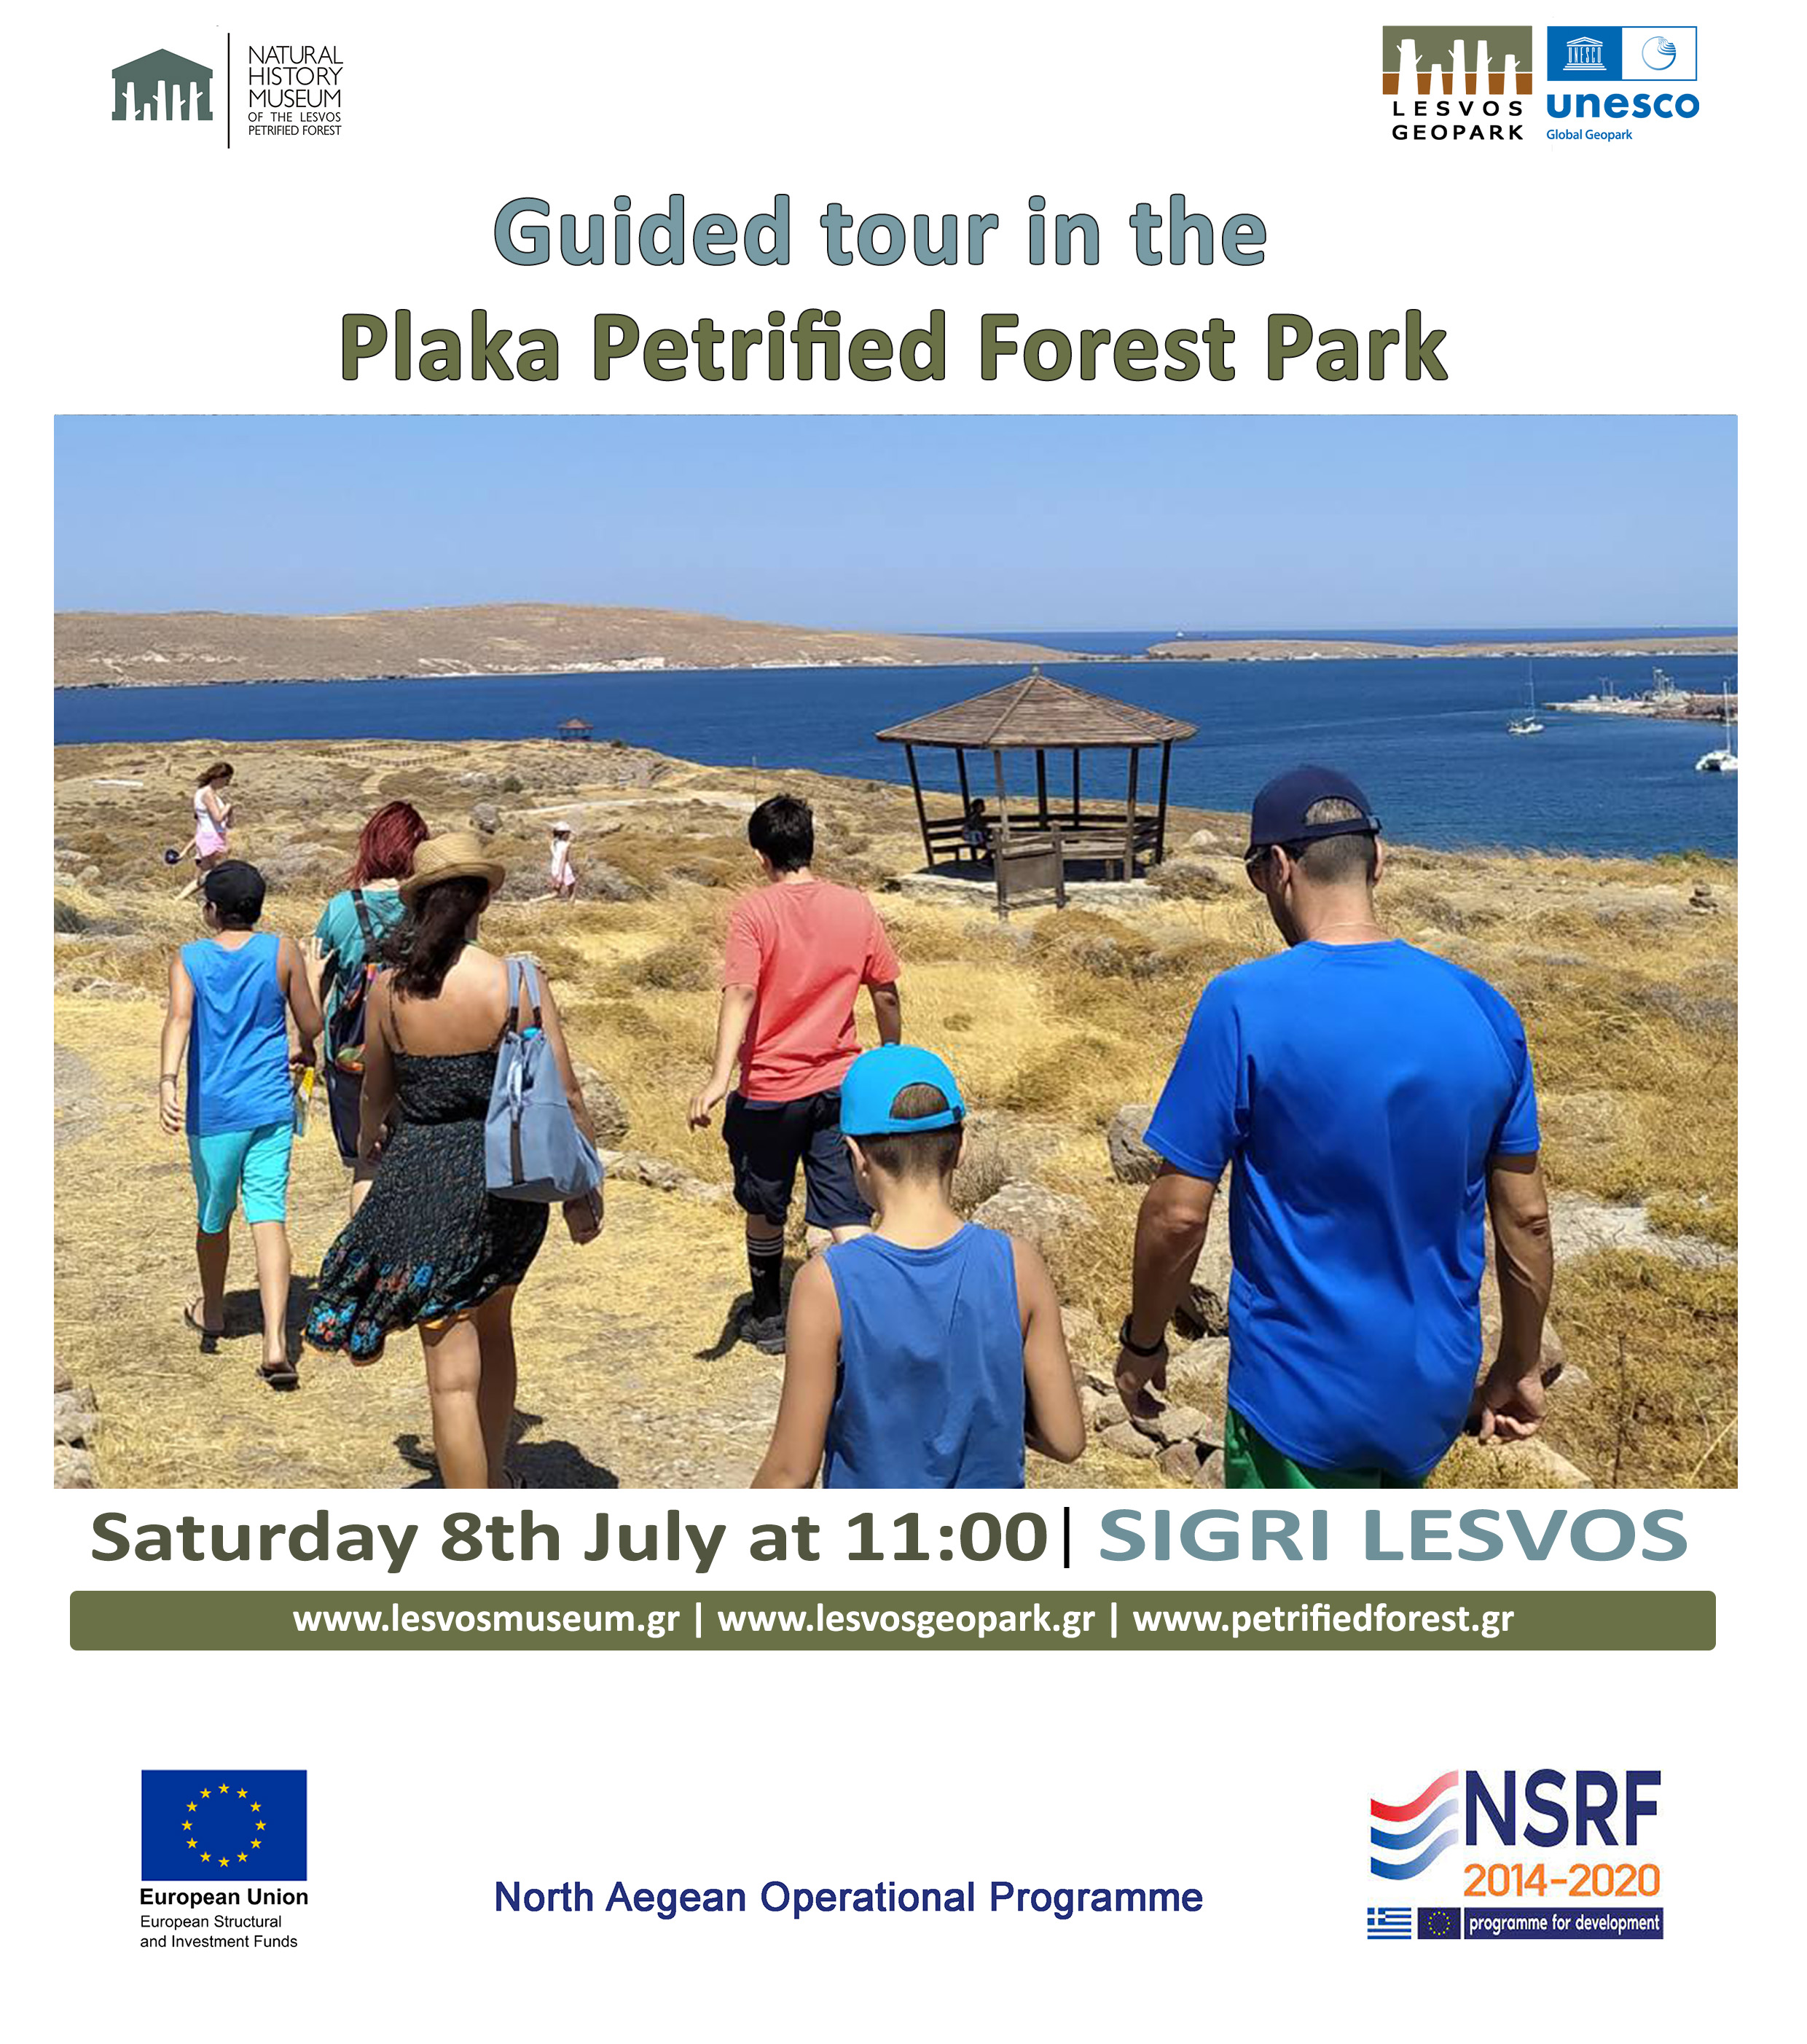 Guided tour for all curious learners at the Plaka Petrified Forest Park 